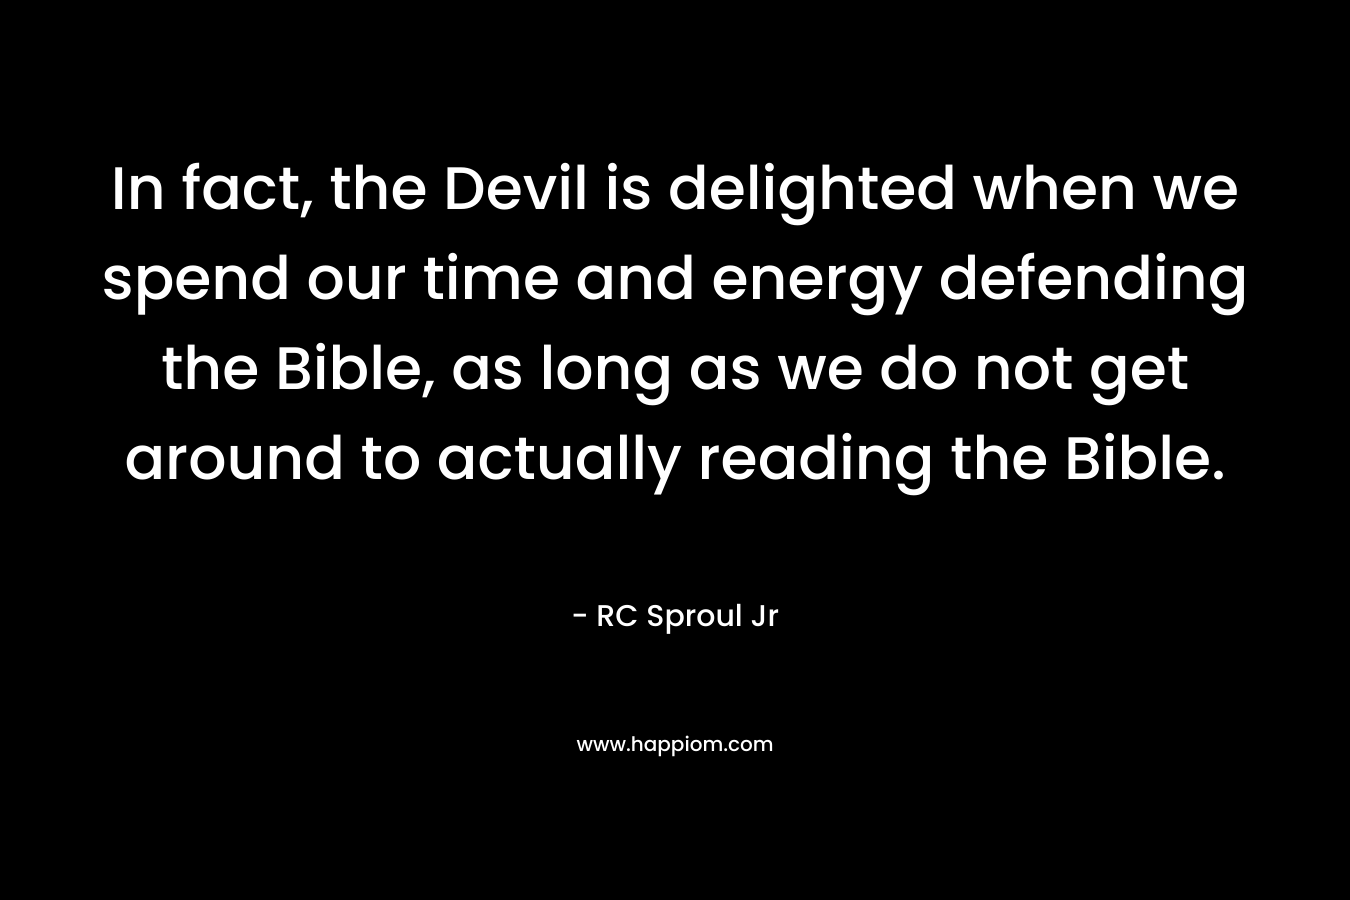 In fact, the Devil is delighted when we spend our time and energy defending the Bible, as long as we do not get around to actually reading the Bible.